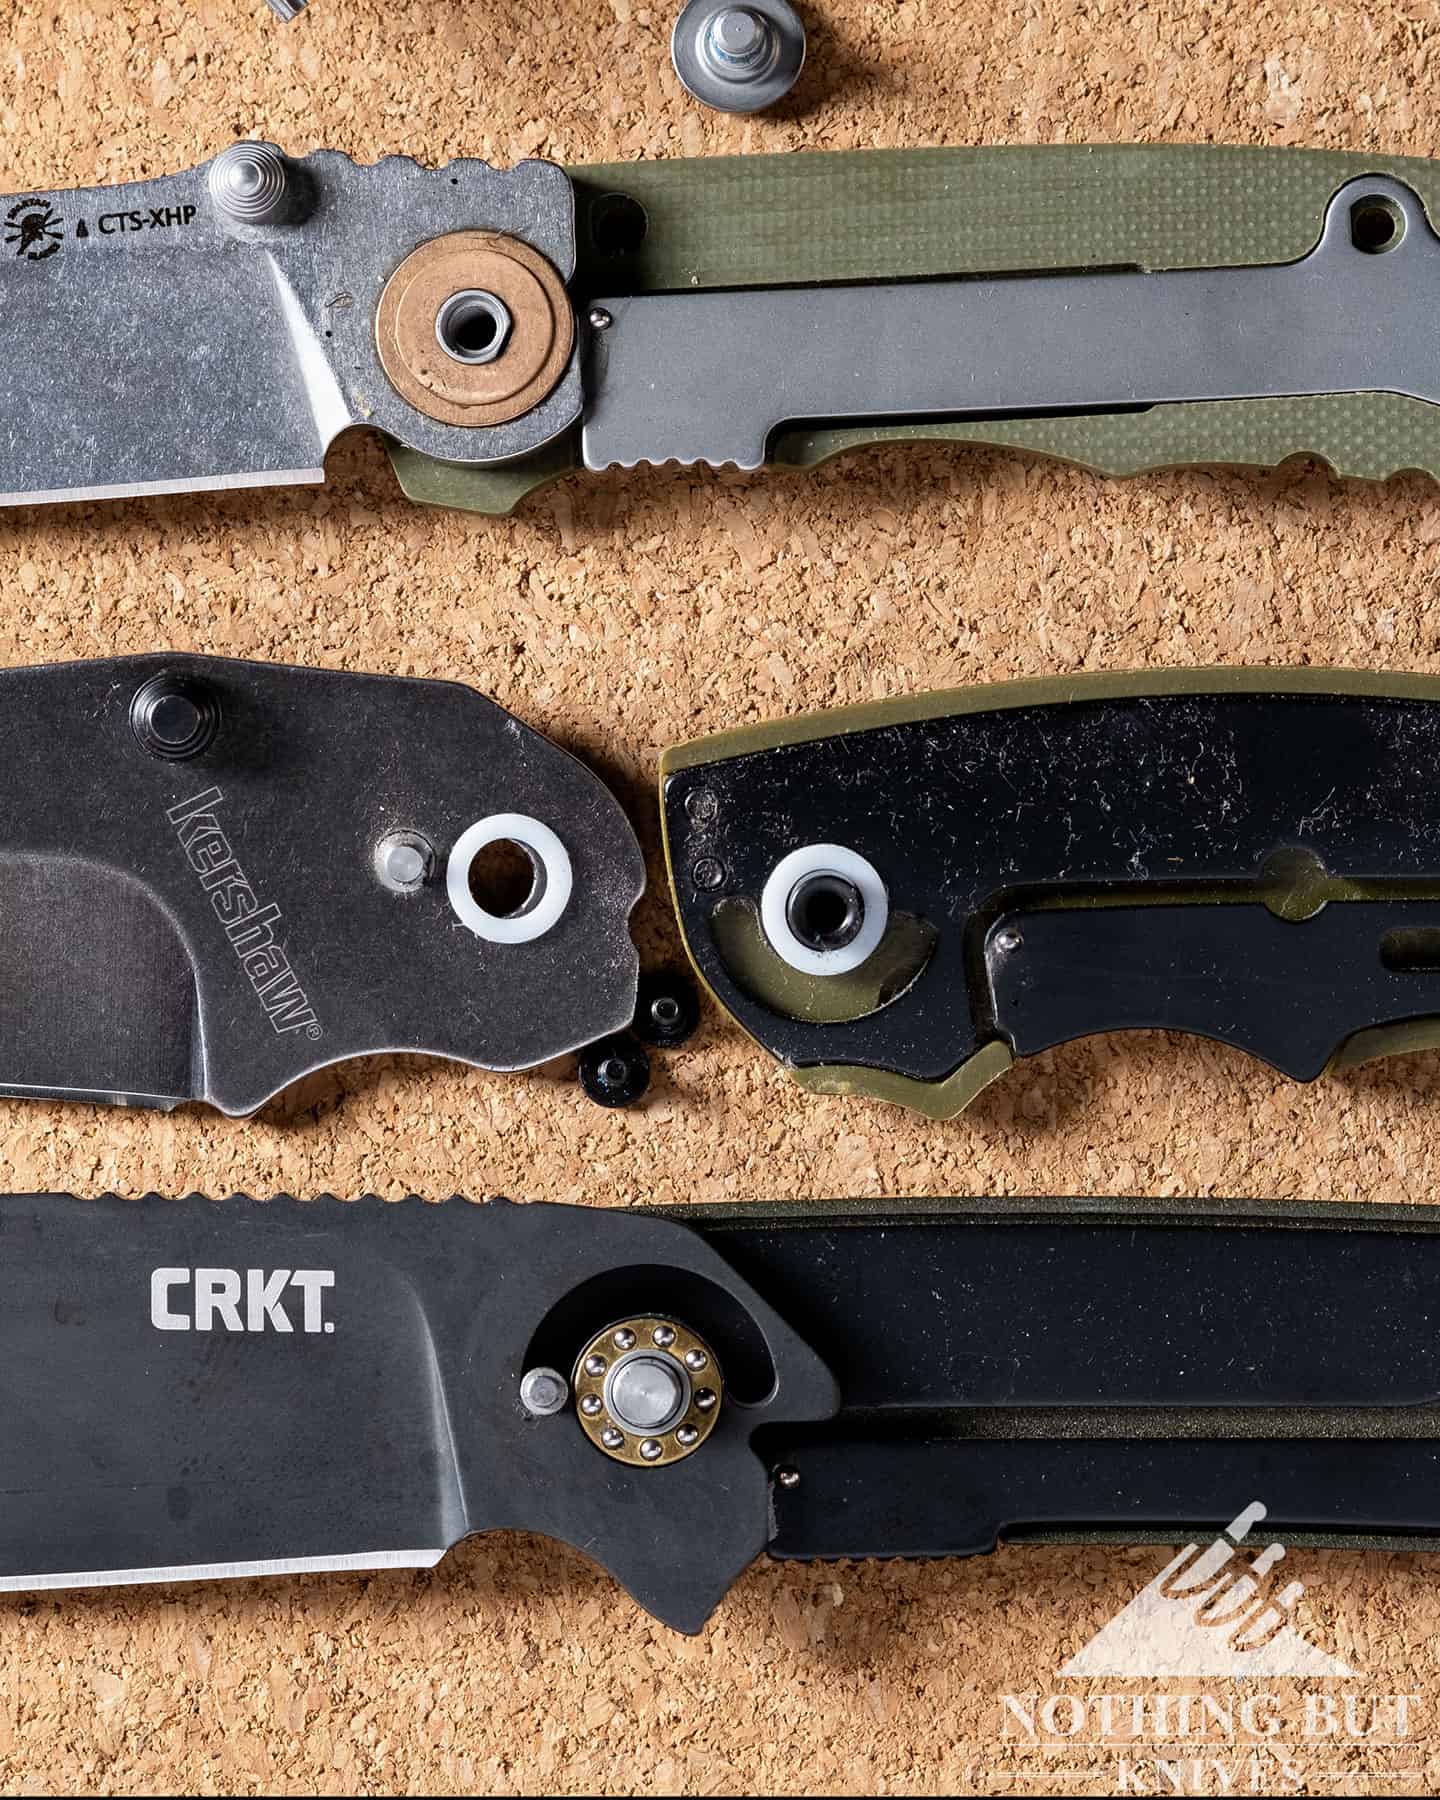 $100 knife v.s. $1000 knife: What's the Difference?